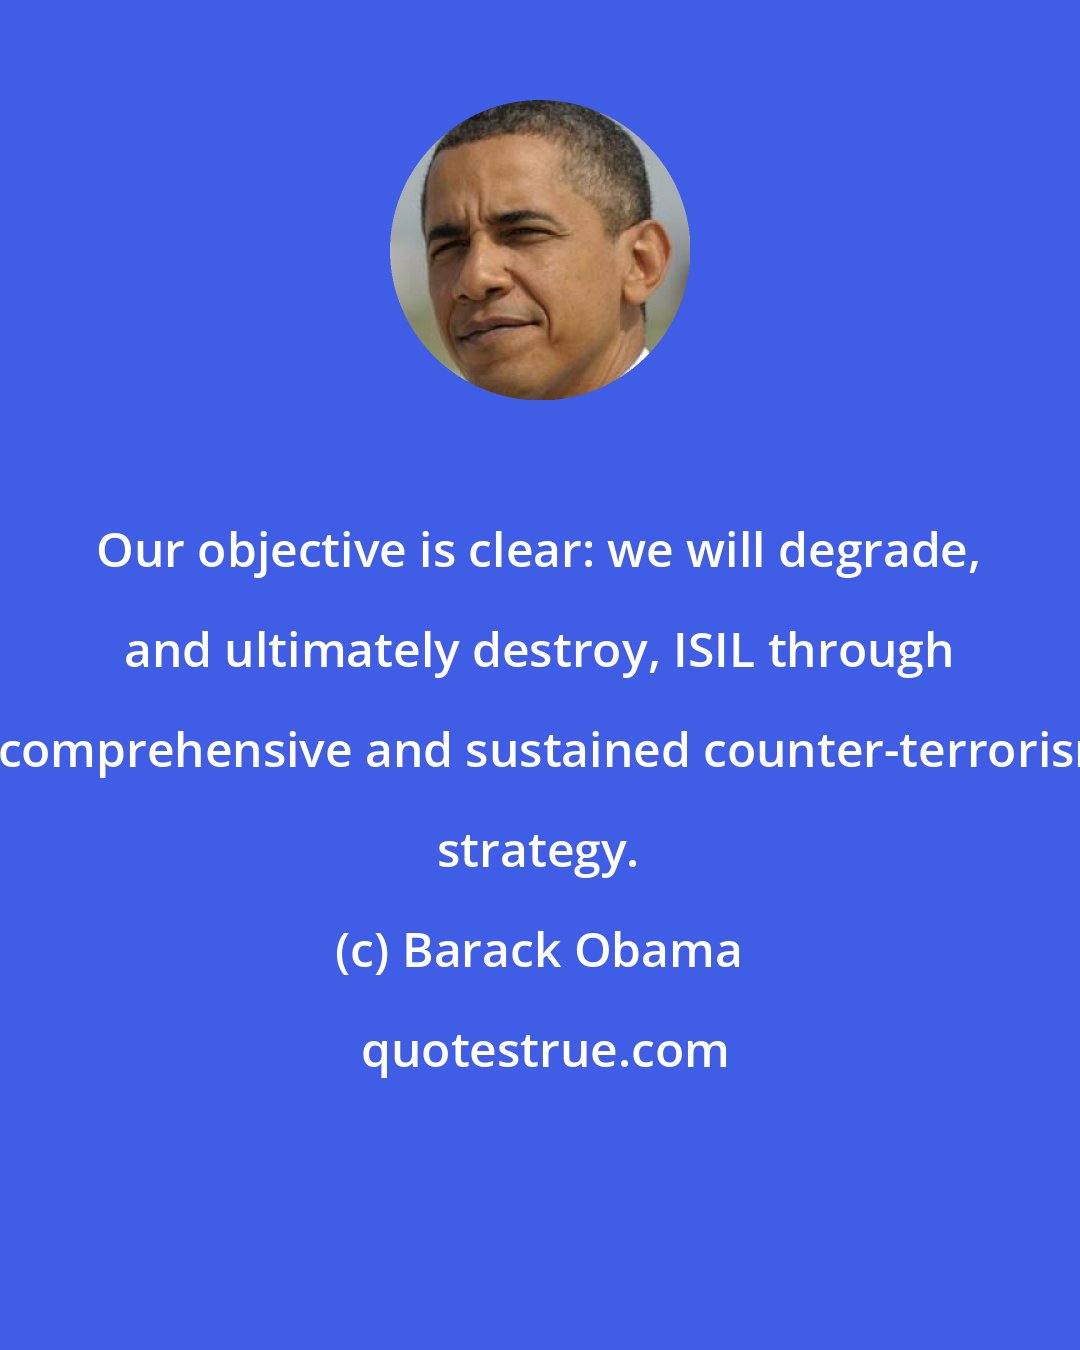 Barack Obama: Our objective is clear: we will degrade, and ultimately destroy, ISIL through a comprehensive and sustained counter-terrorism strategy.